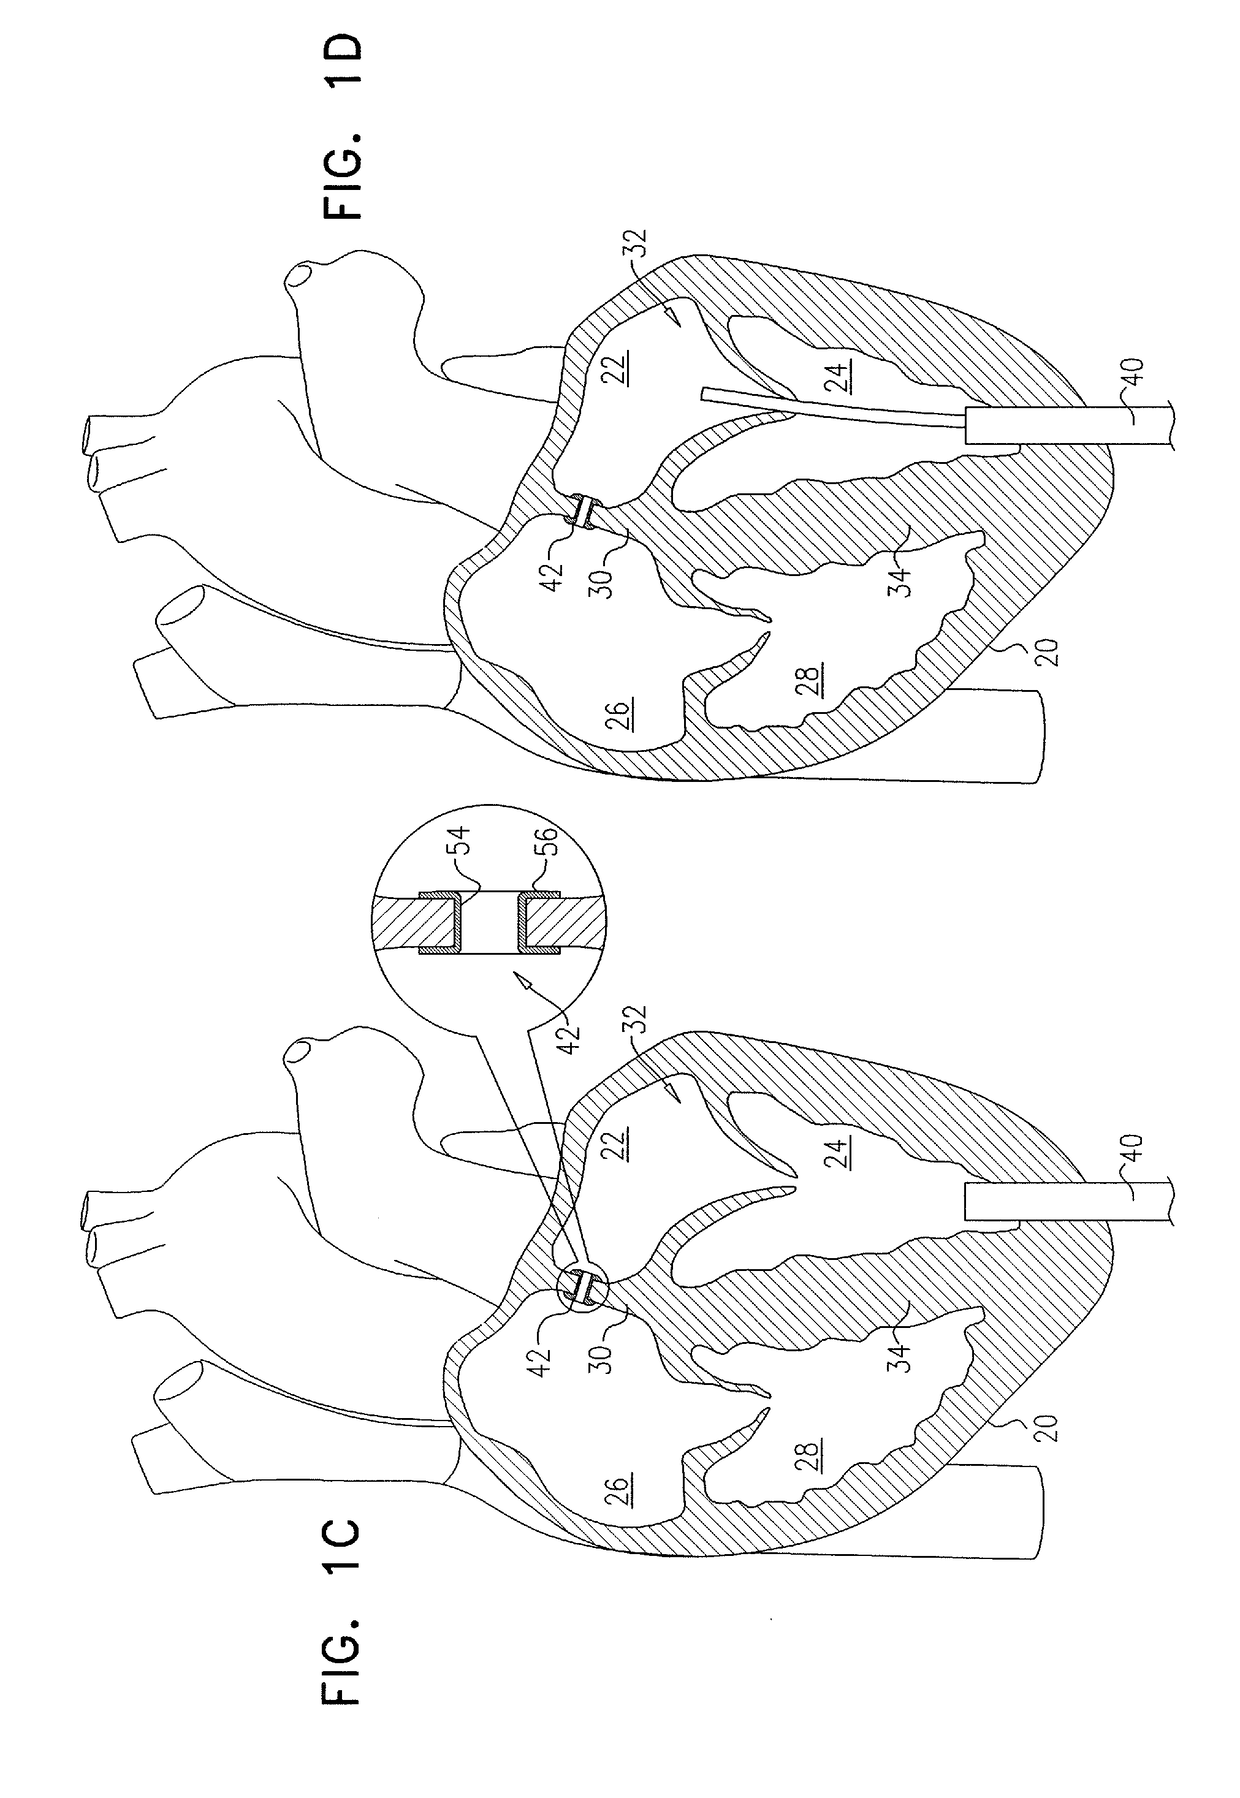 Techniques for providing a replacement valve and transseptal communication